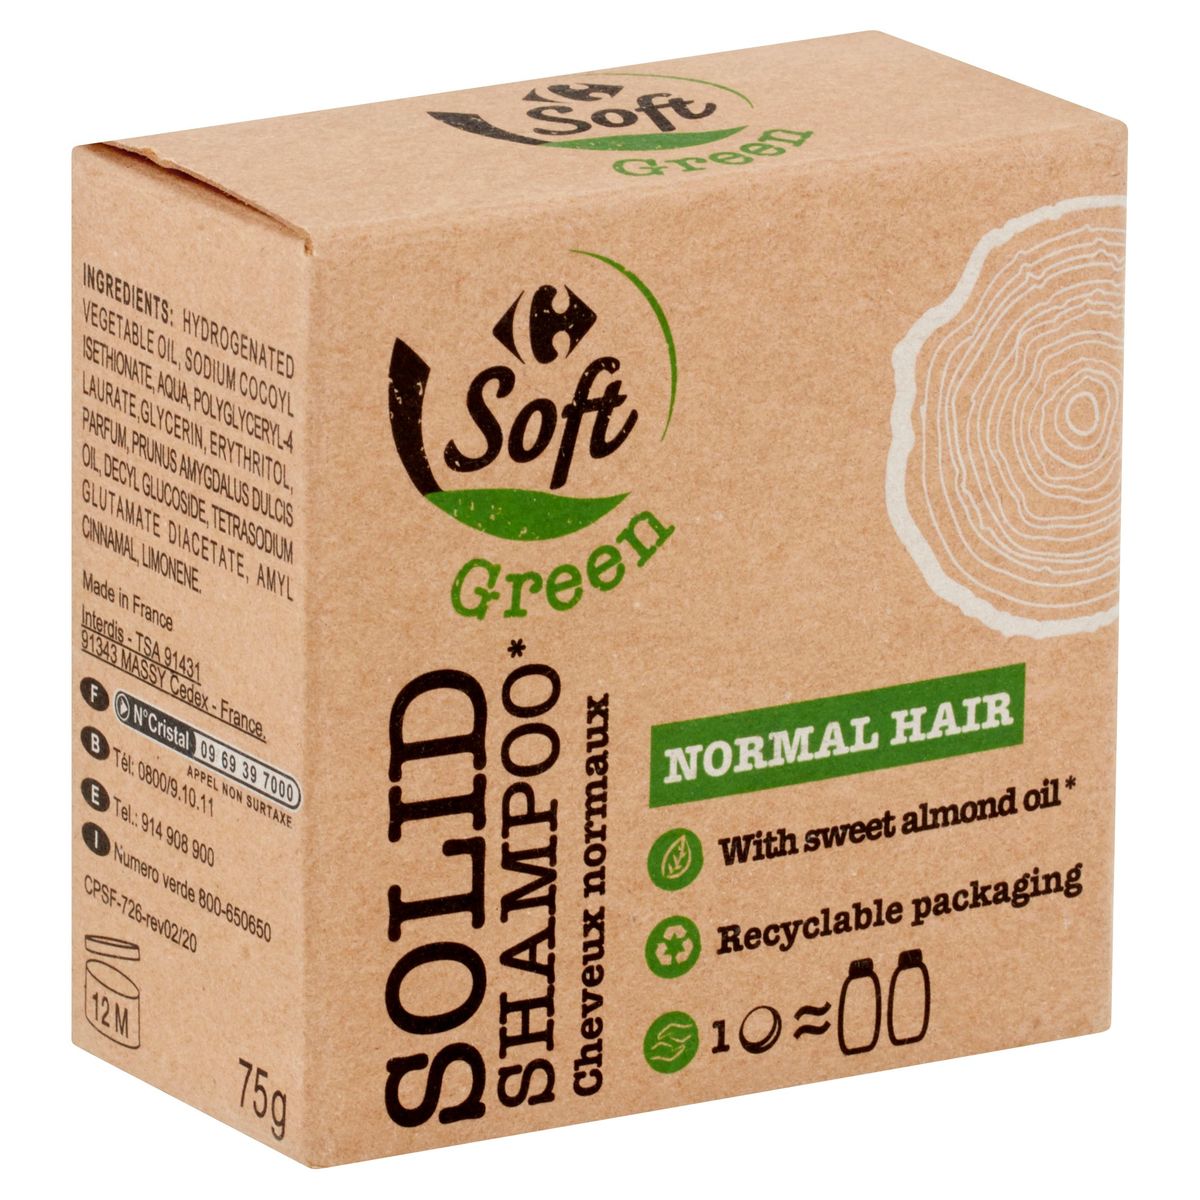 Carrefour Soft Green Solid Shampoo Cheveux Normaux 75 g